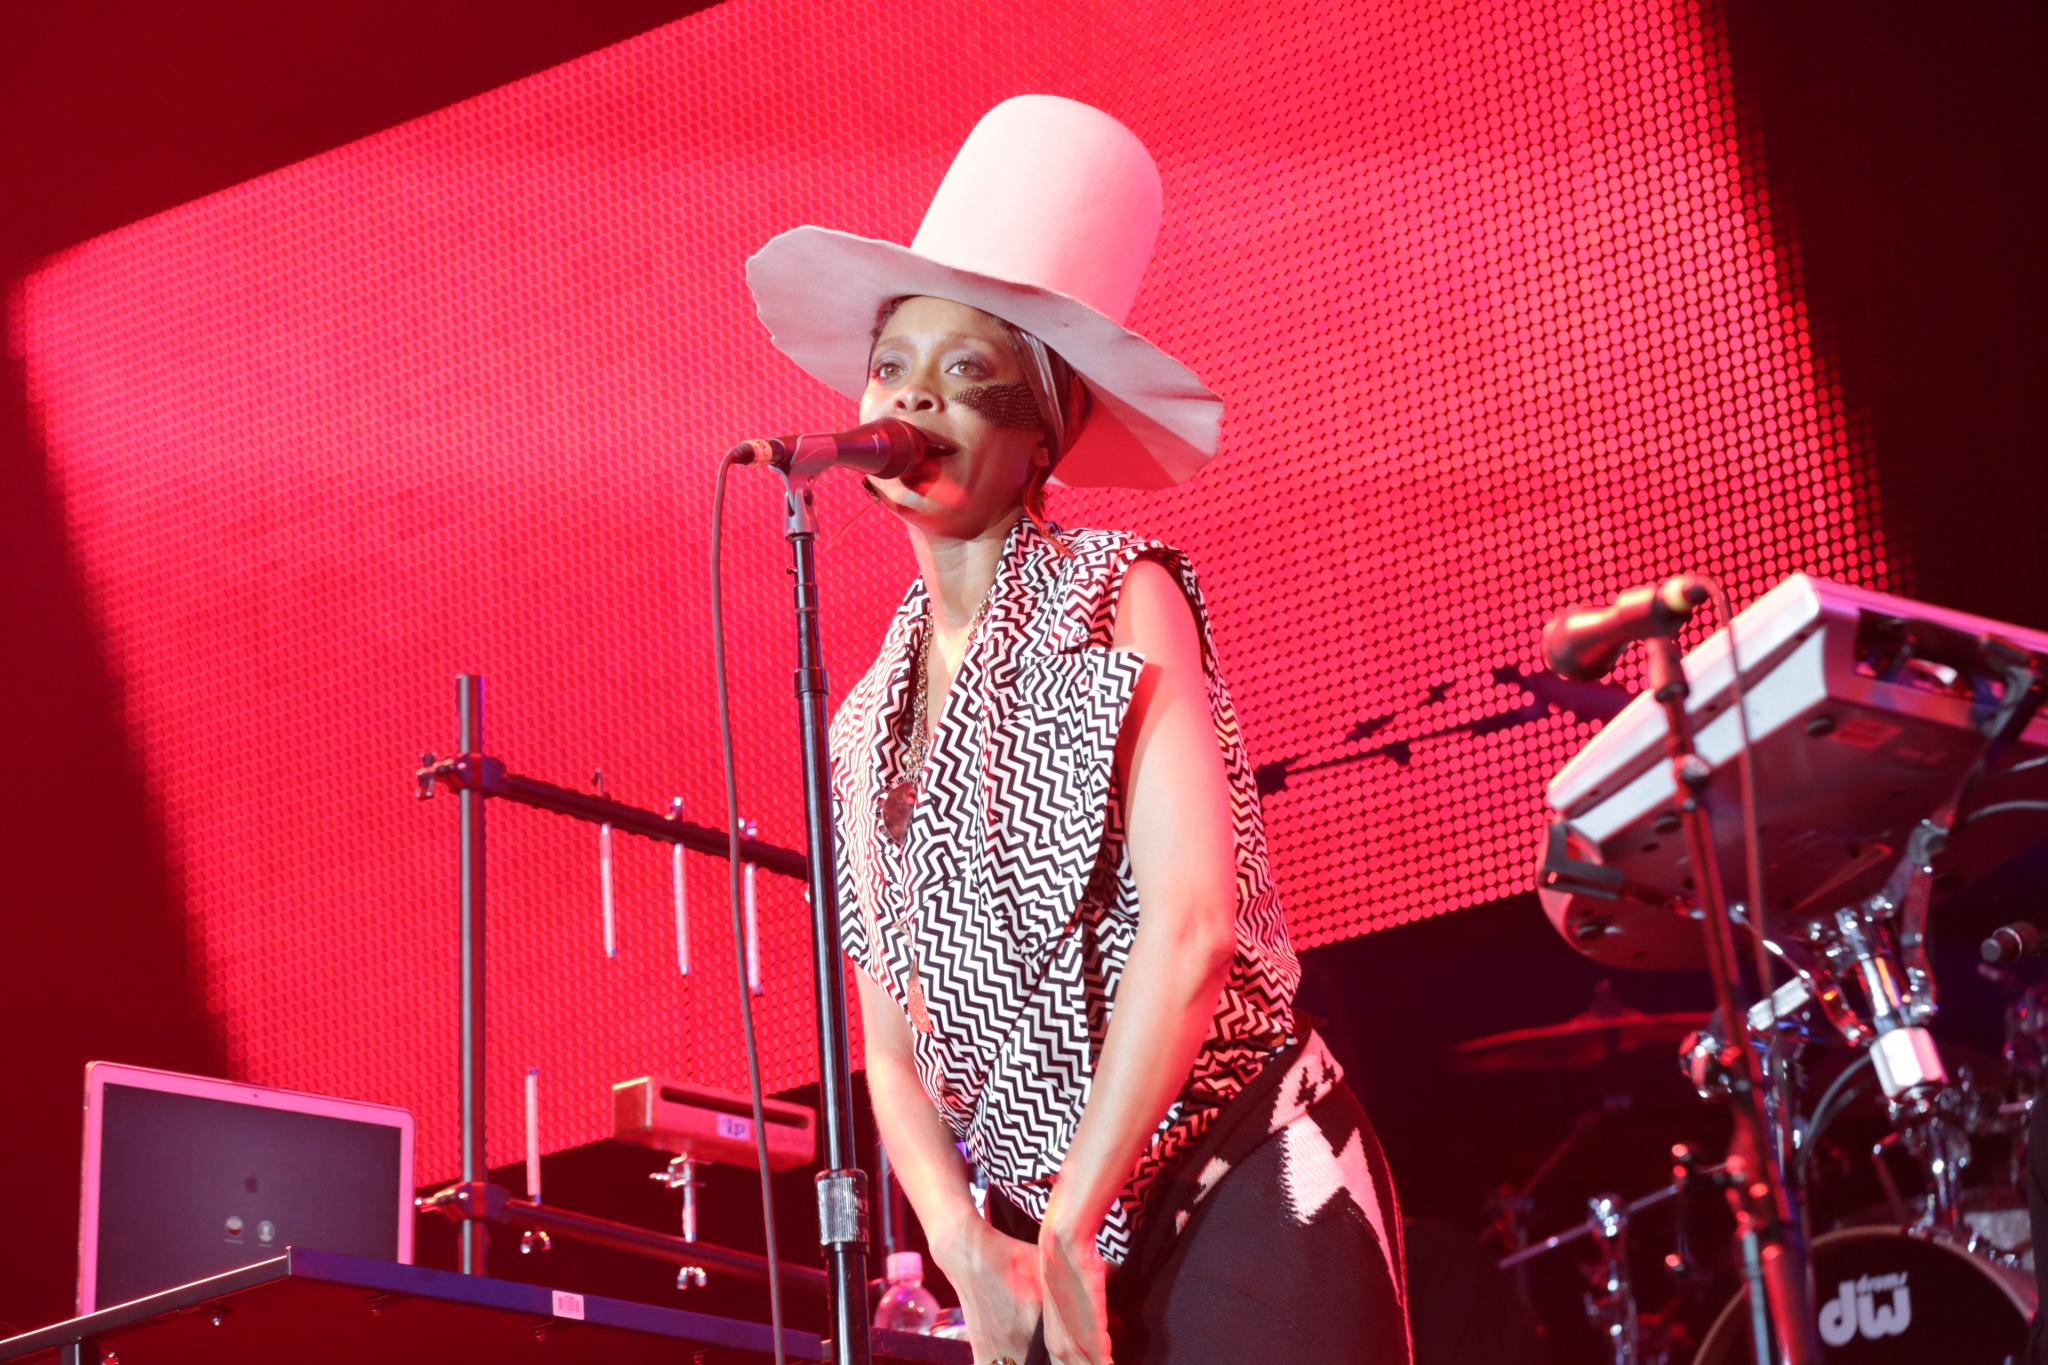 Badu Rocks the ESSENCE Festival Stage with Show-Stopping Performance